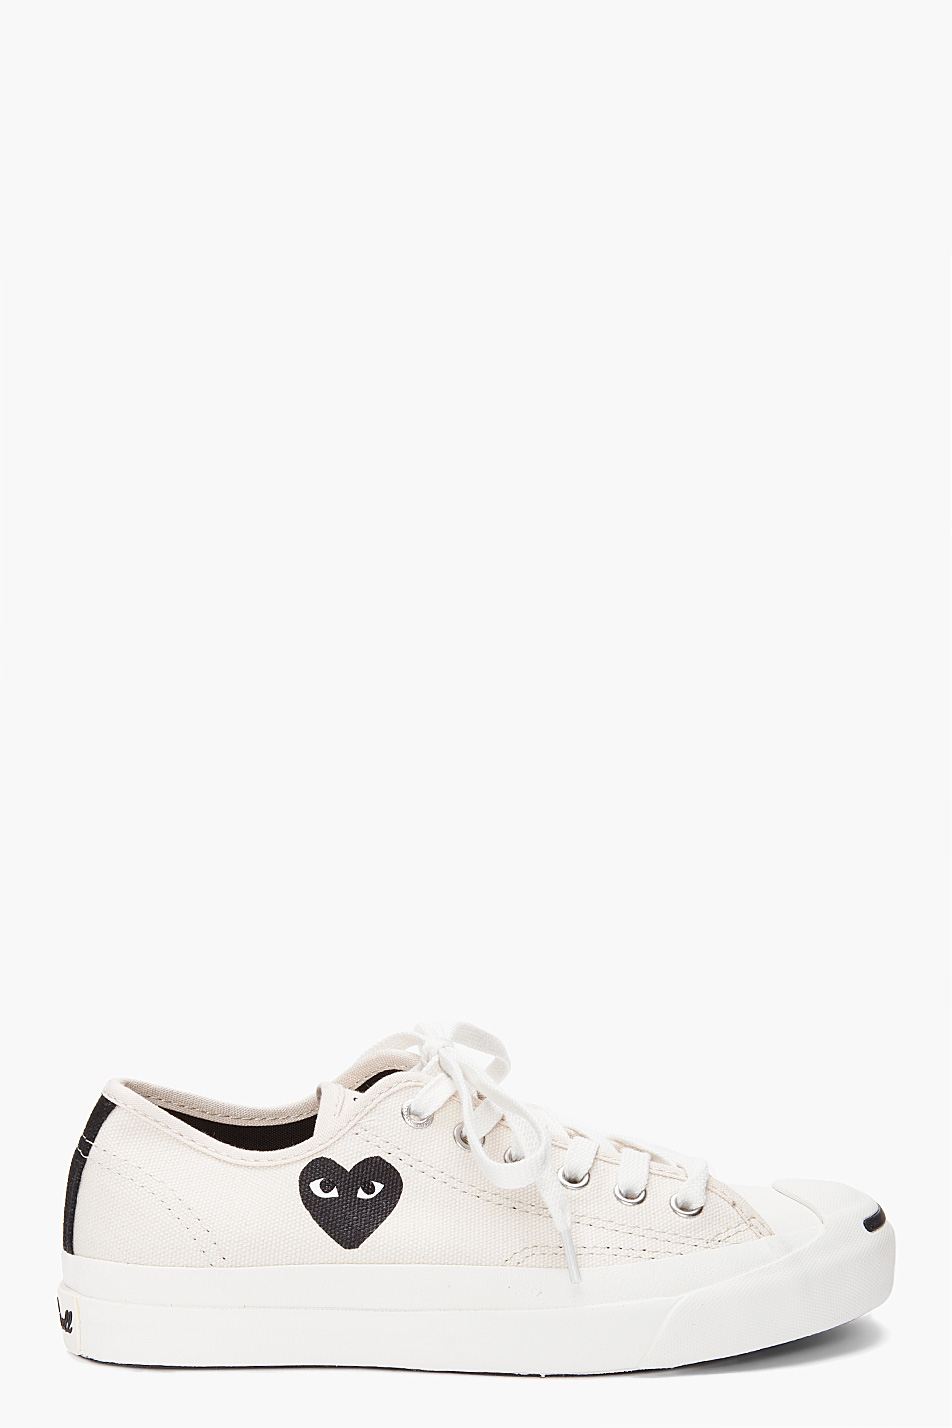 cdg converse jack purcell